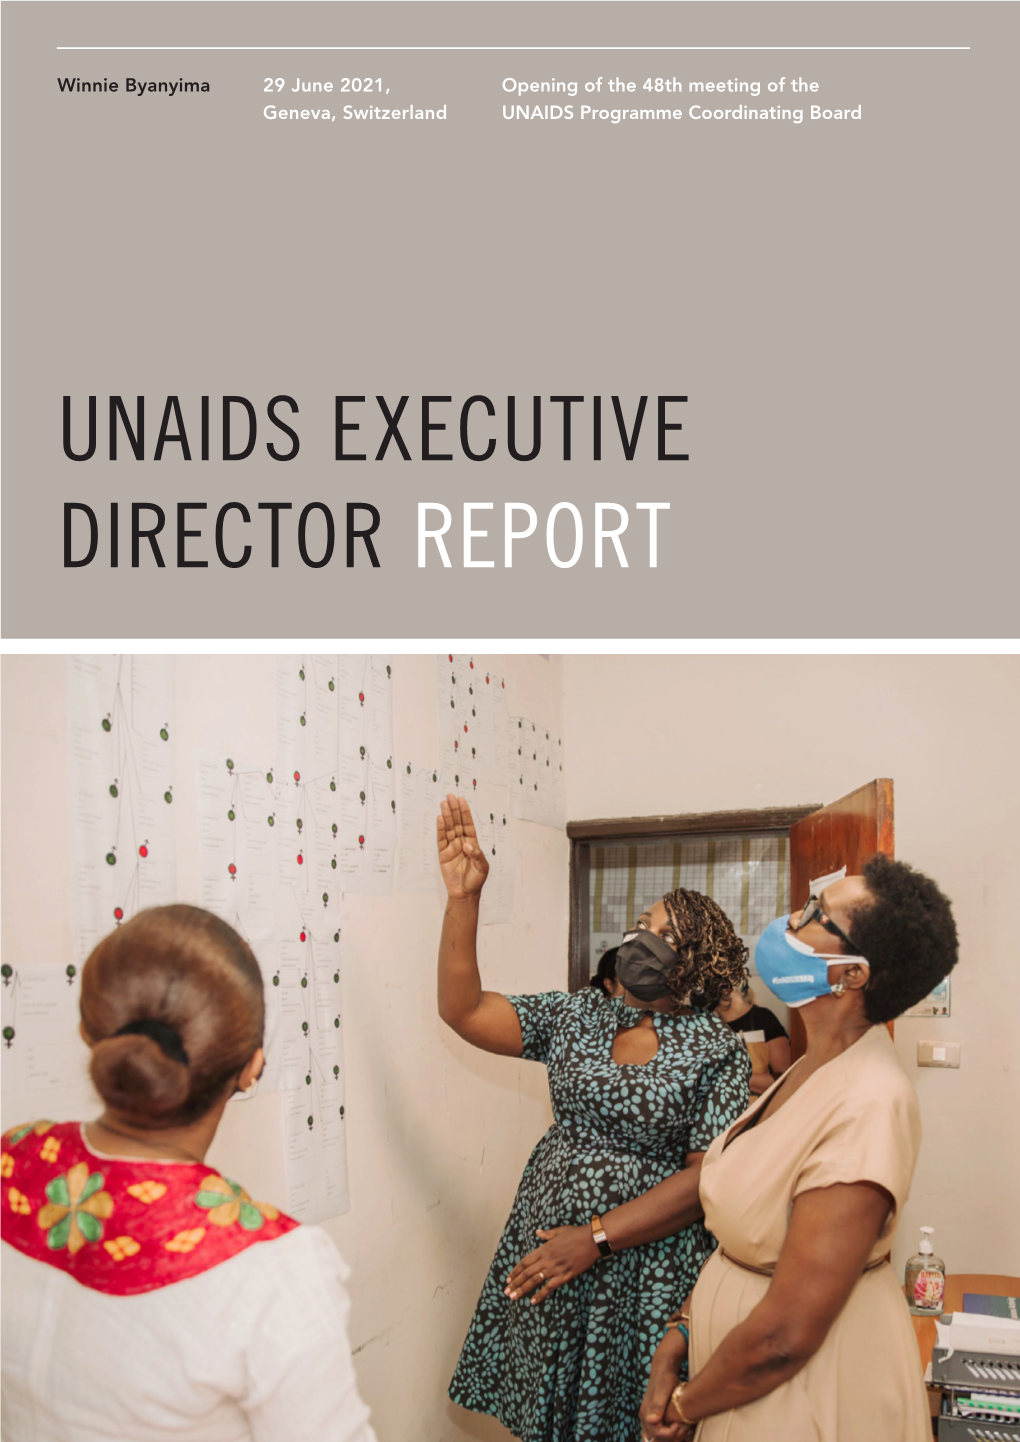 Unaids Executive Director Report Profound Change Often Occurs in the Context of Crisis